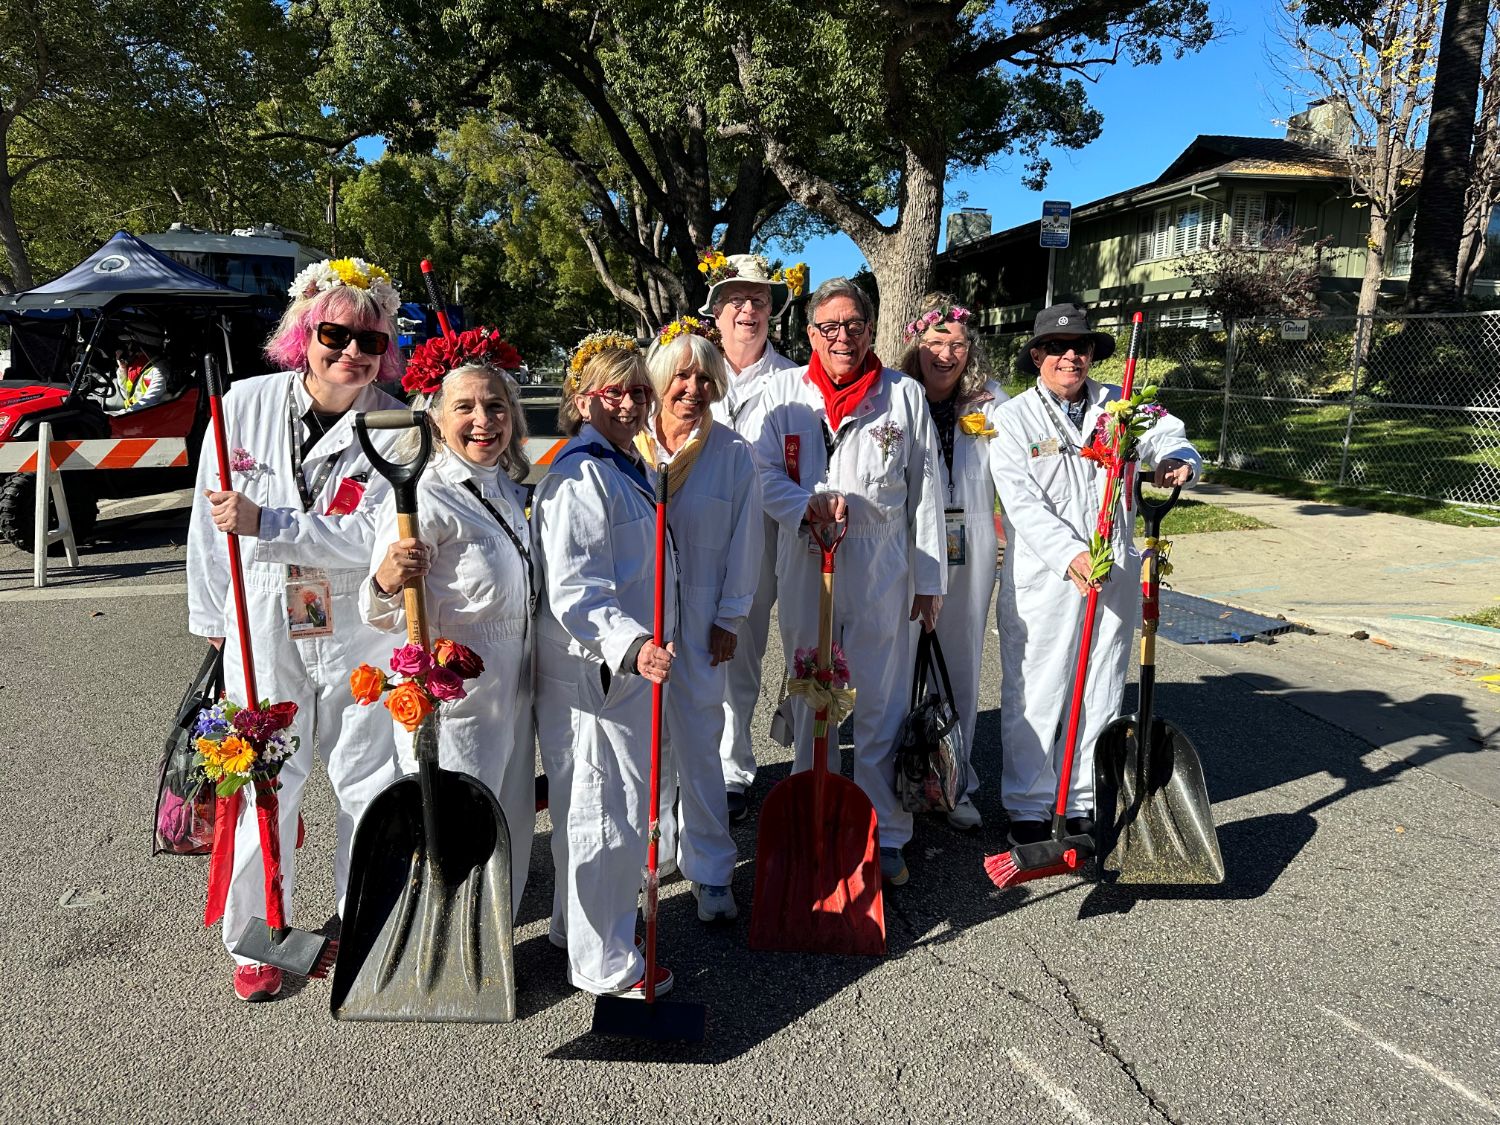 PHOTO: Bill Glazier | The South Pasadenan | A group of pooper scoopers, those who clean up after horses, were in high spirits after the Rose Parade.